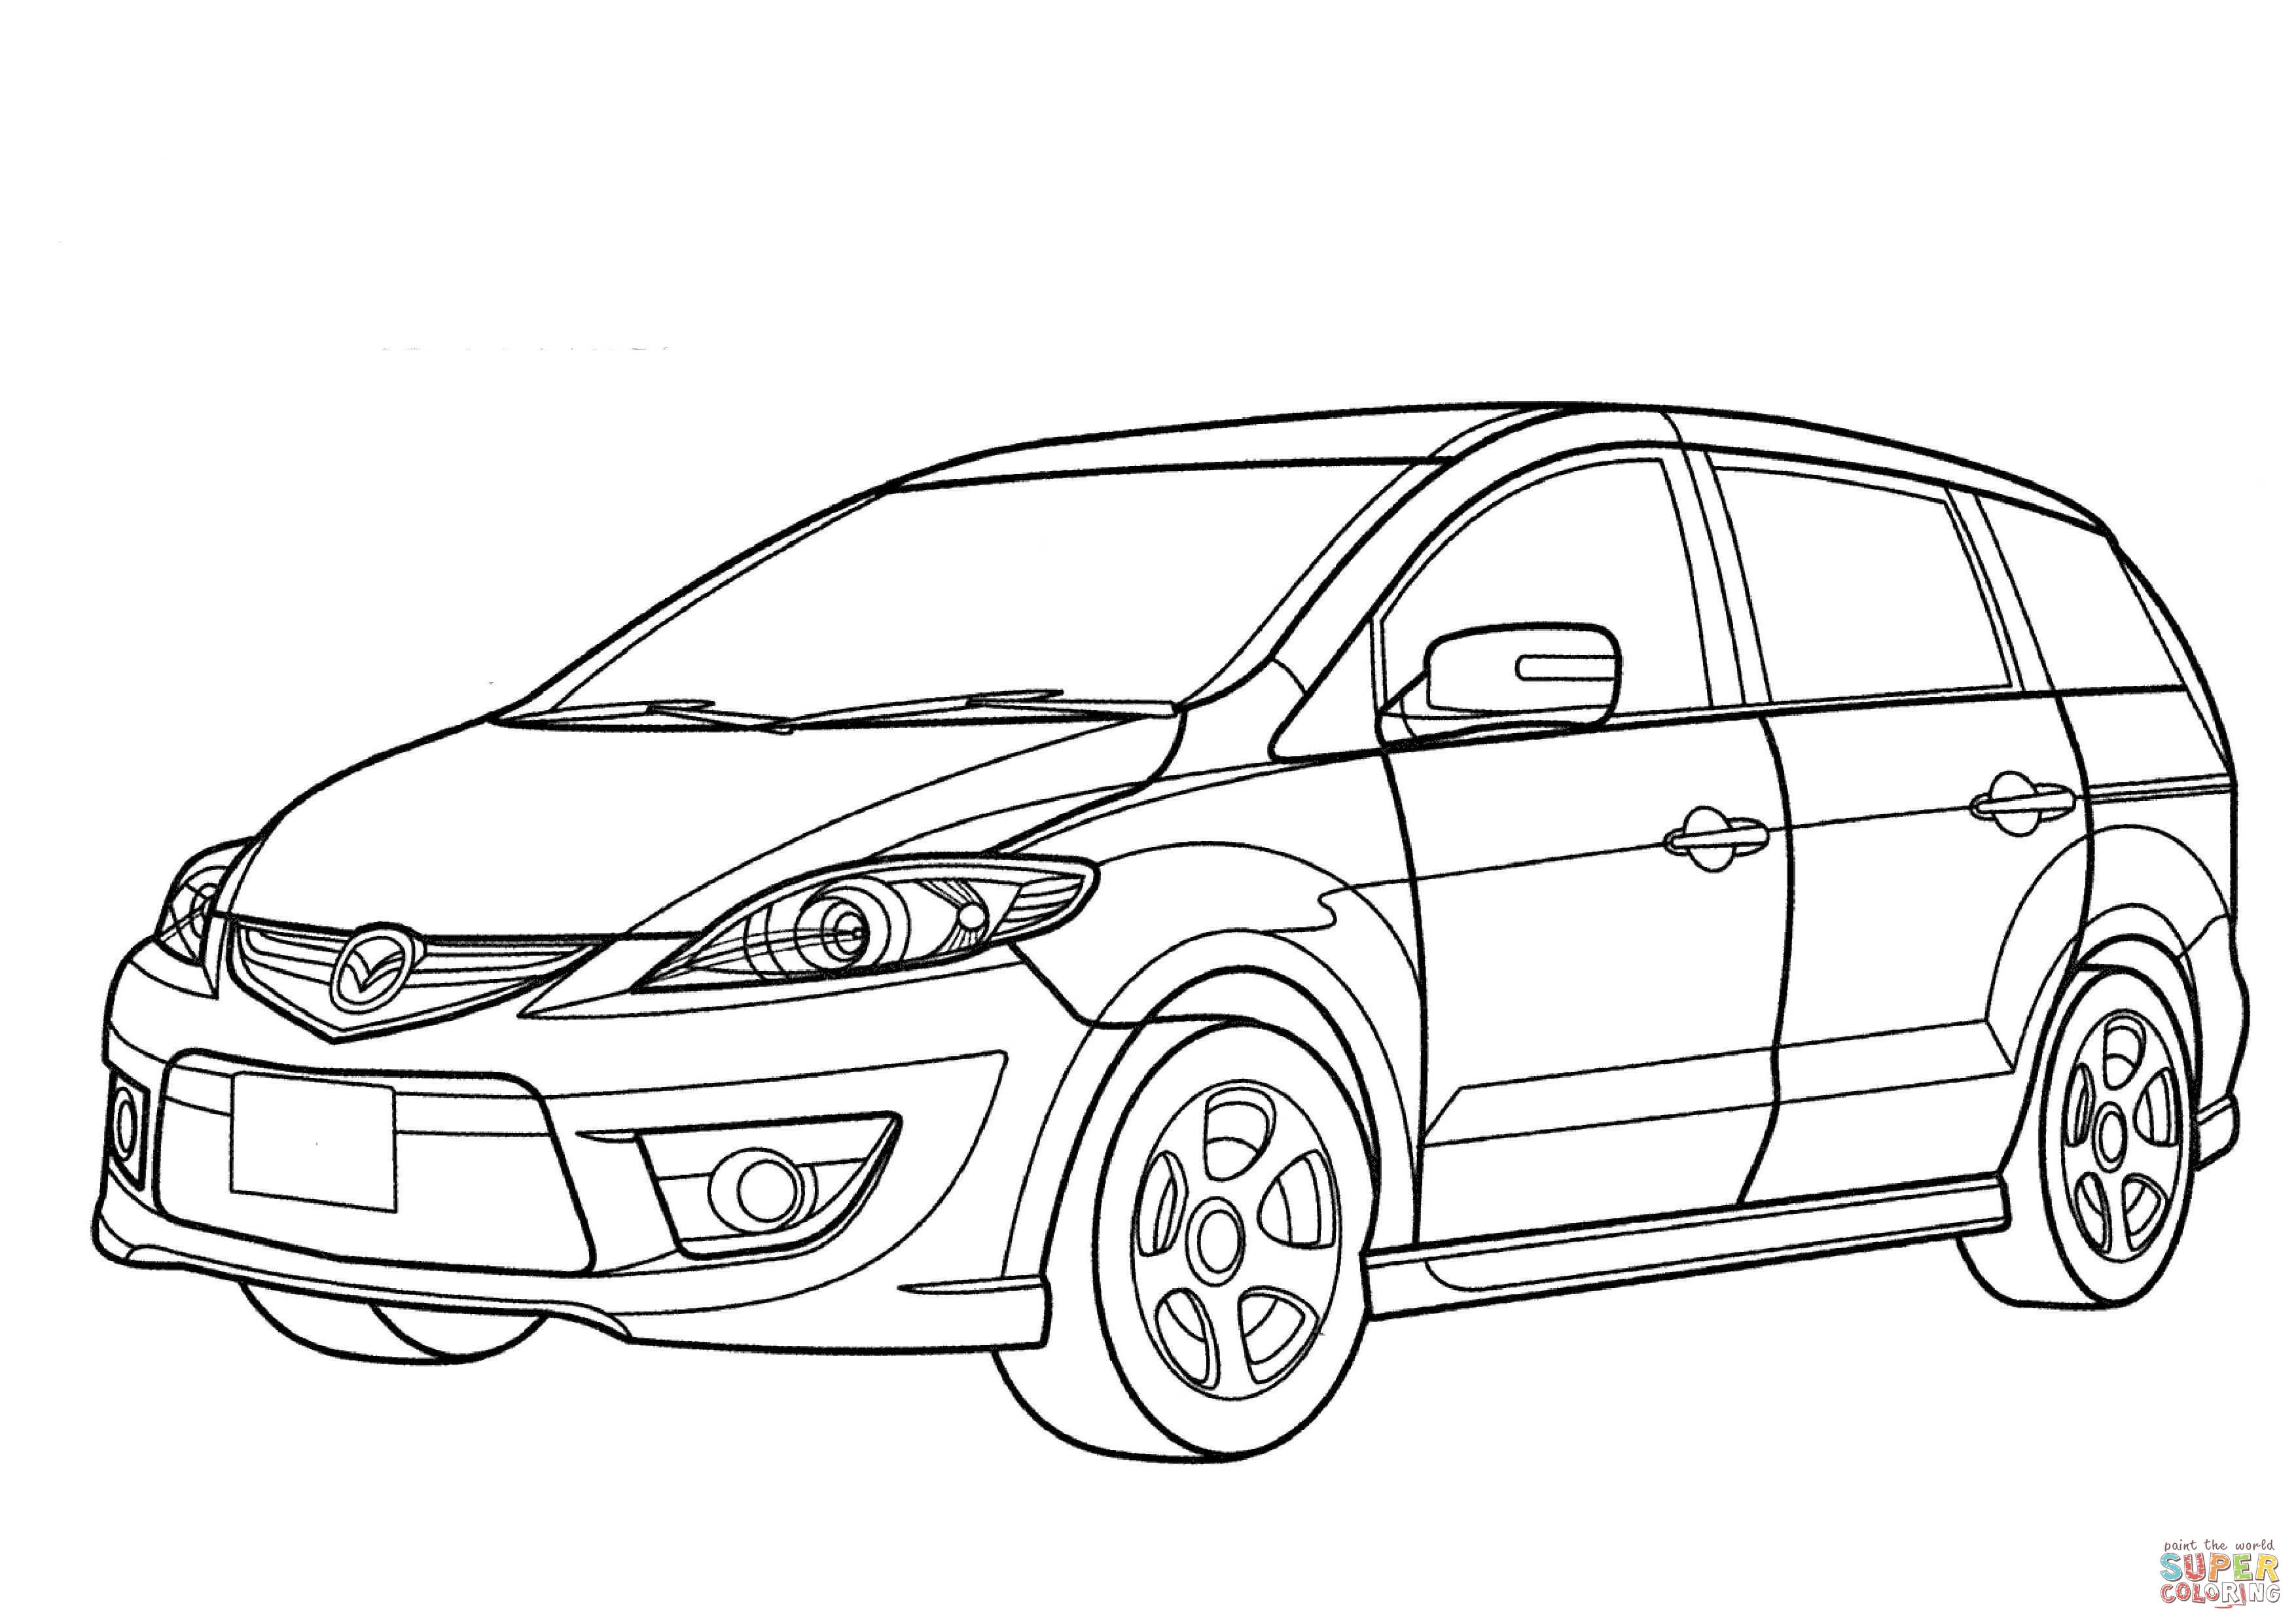 Mazda Premacy minivan coloring page | Free Printable Coloring Pages